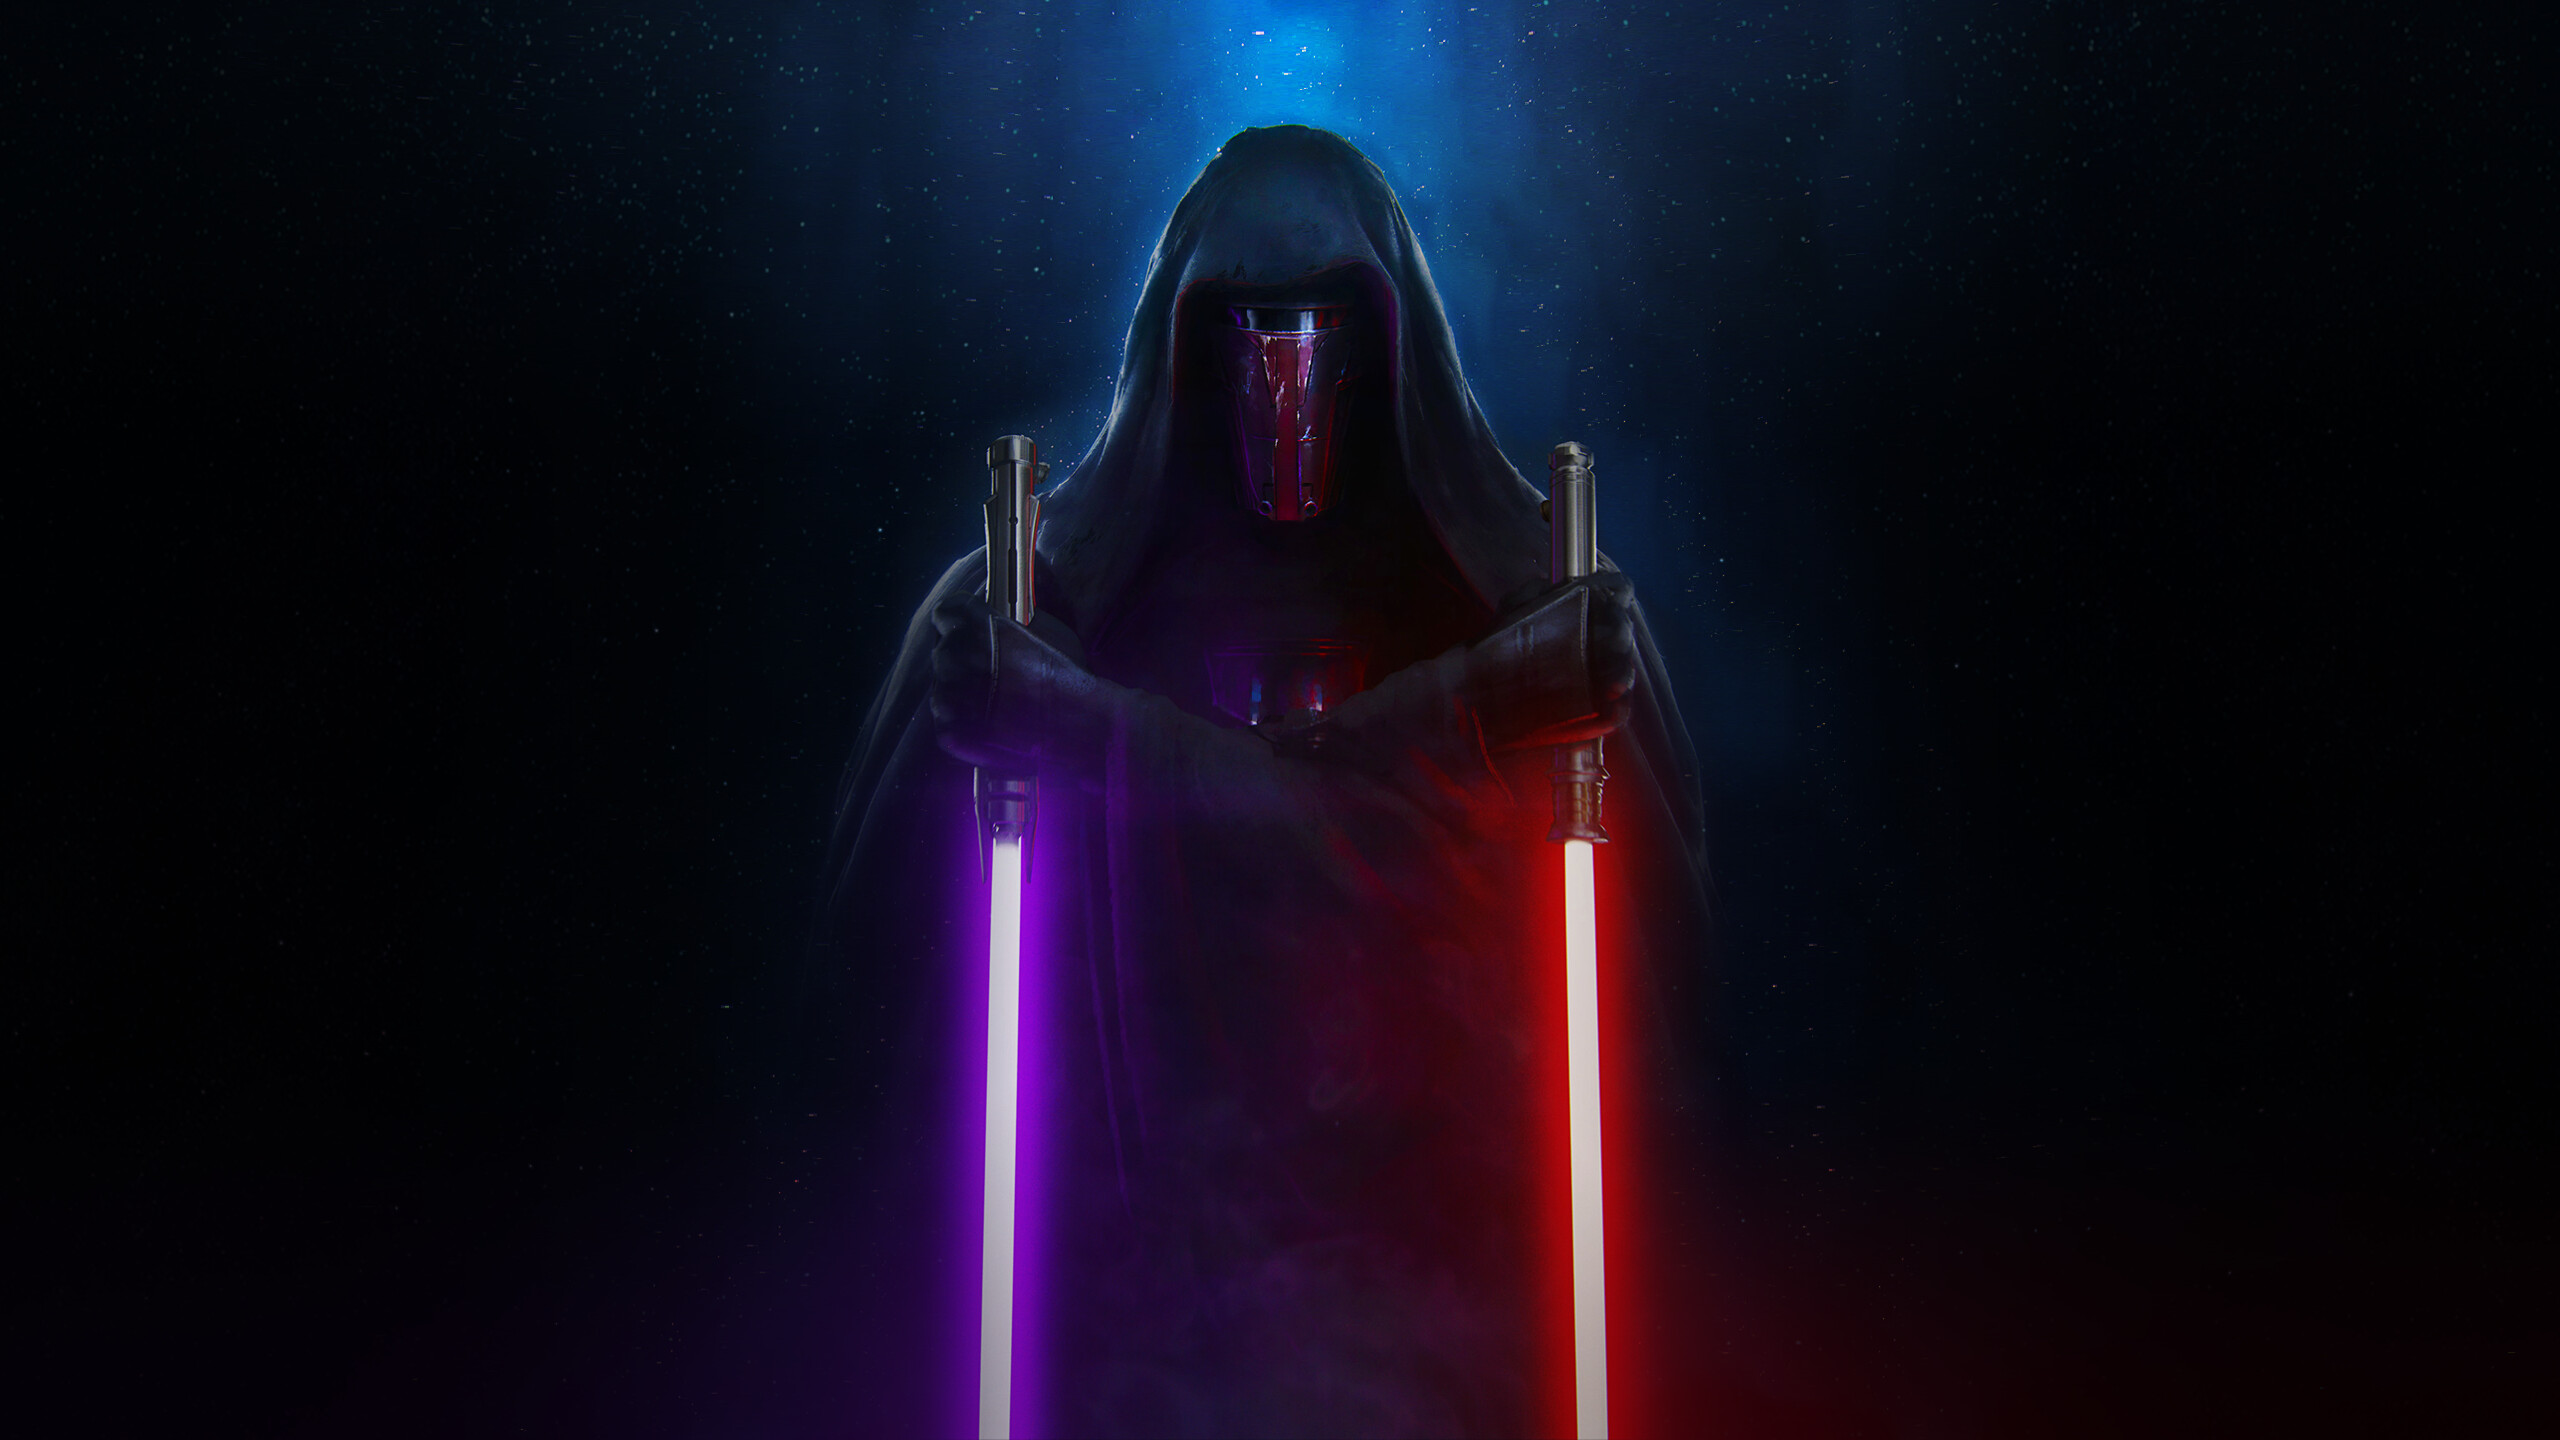 Star Wars: Darth Revan, A Sith Lord and the namesake of the Sith Eternal army's 3rd Legion. 2560x1440 HD Wallpaper.